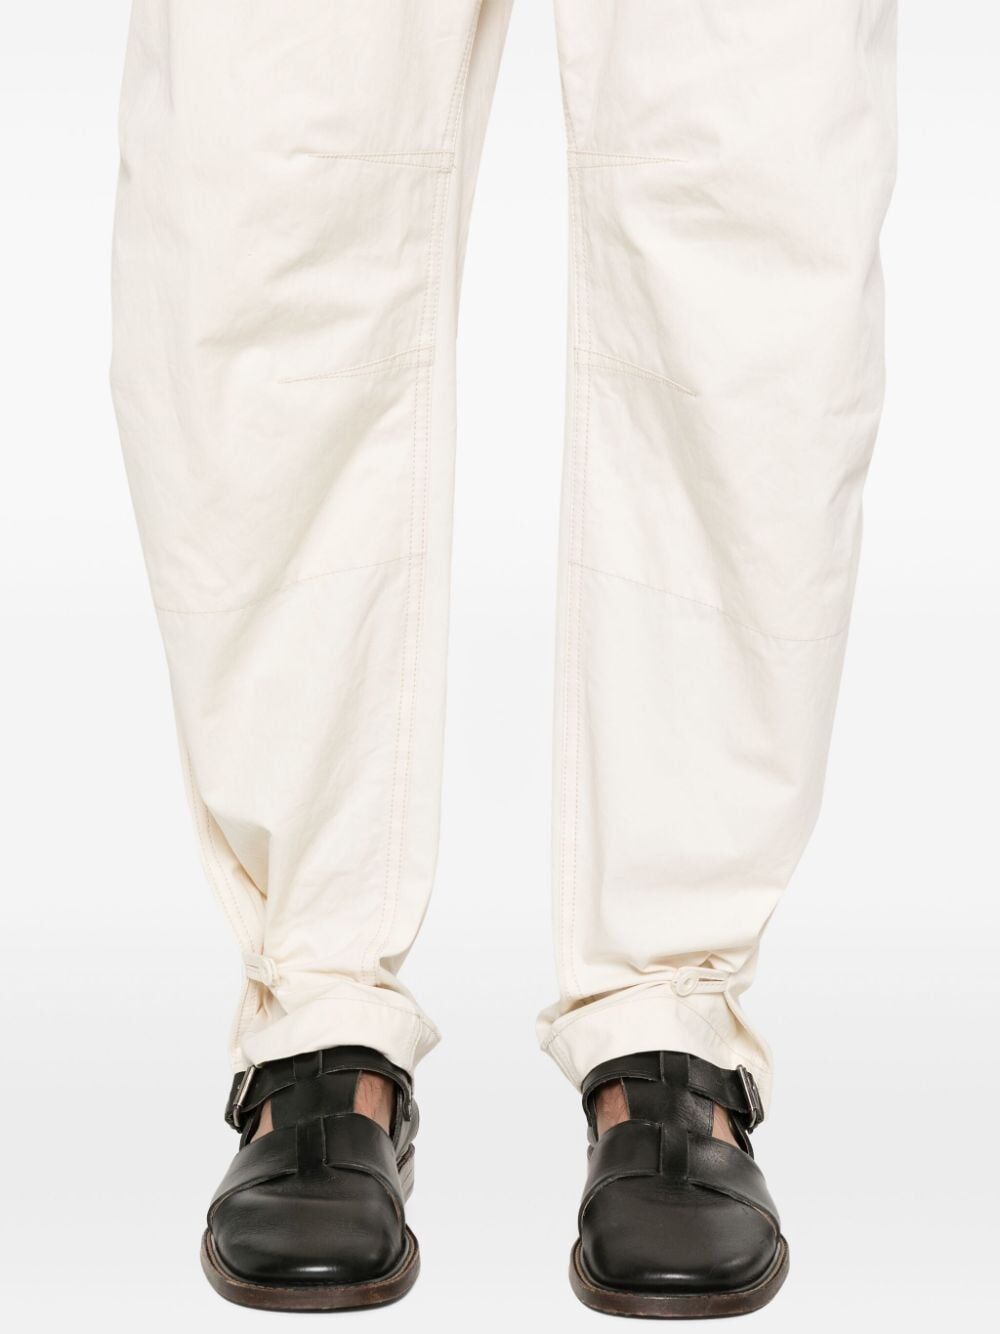 LEMAIRE-MAXI MILITARY PANTS-